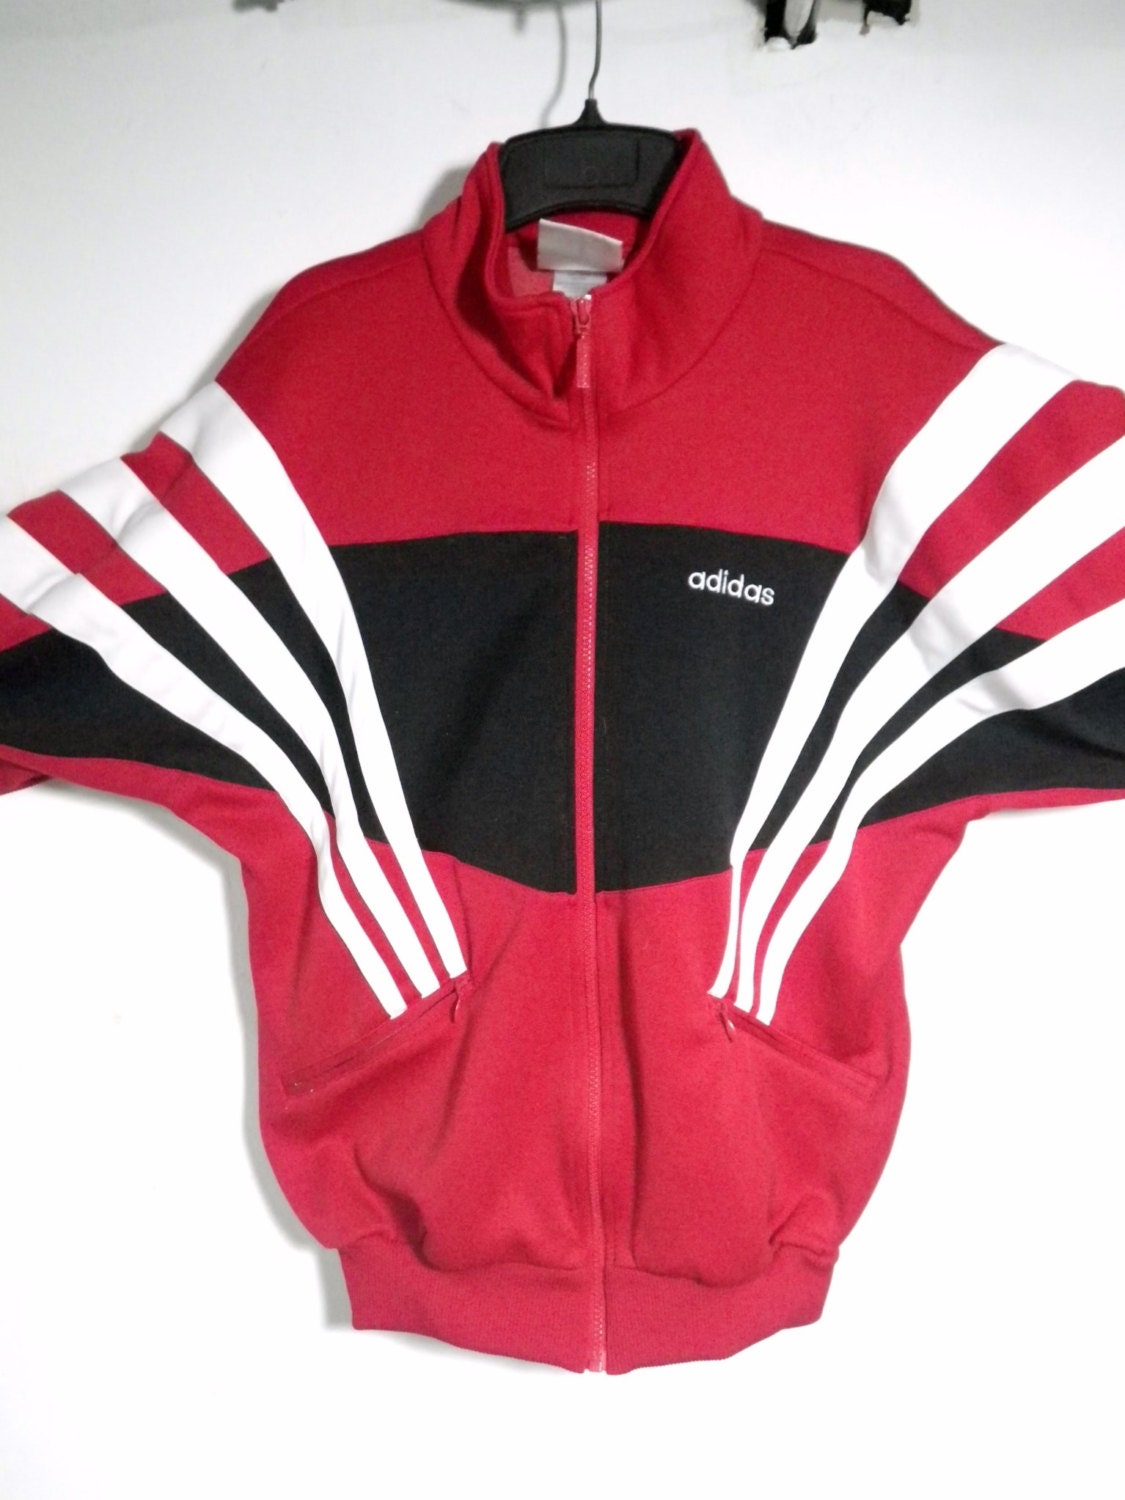 Vintage Adidas 80s Mens Jacket Size Small by BrickCity on Etsy